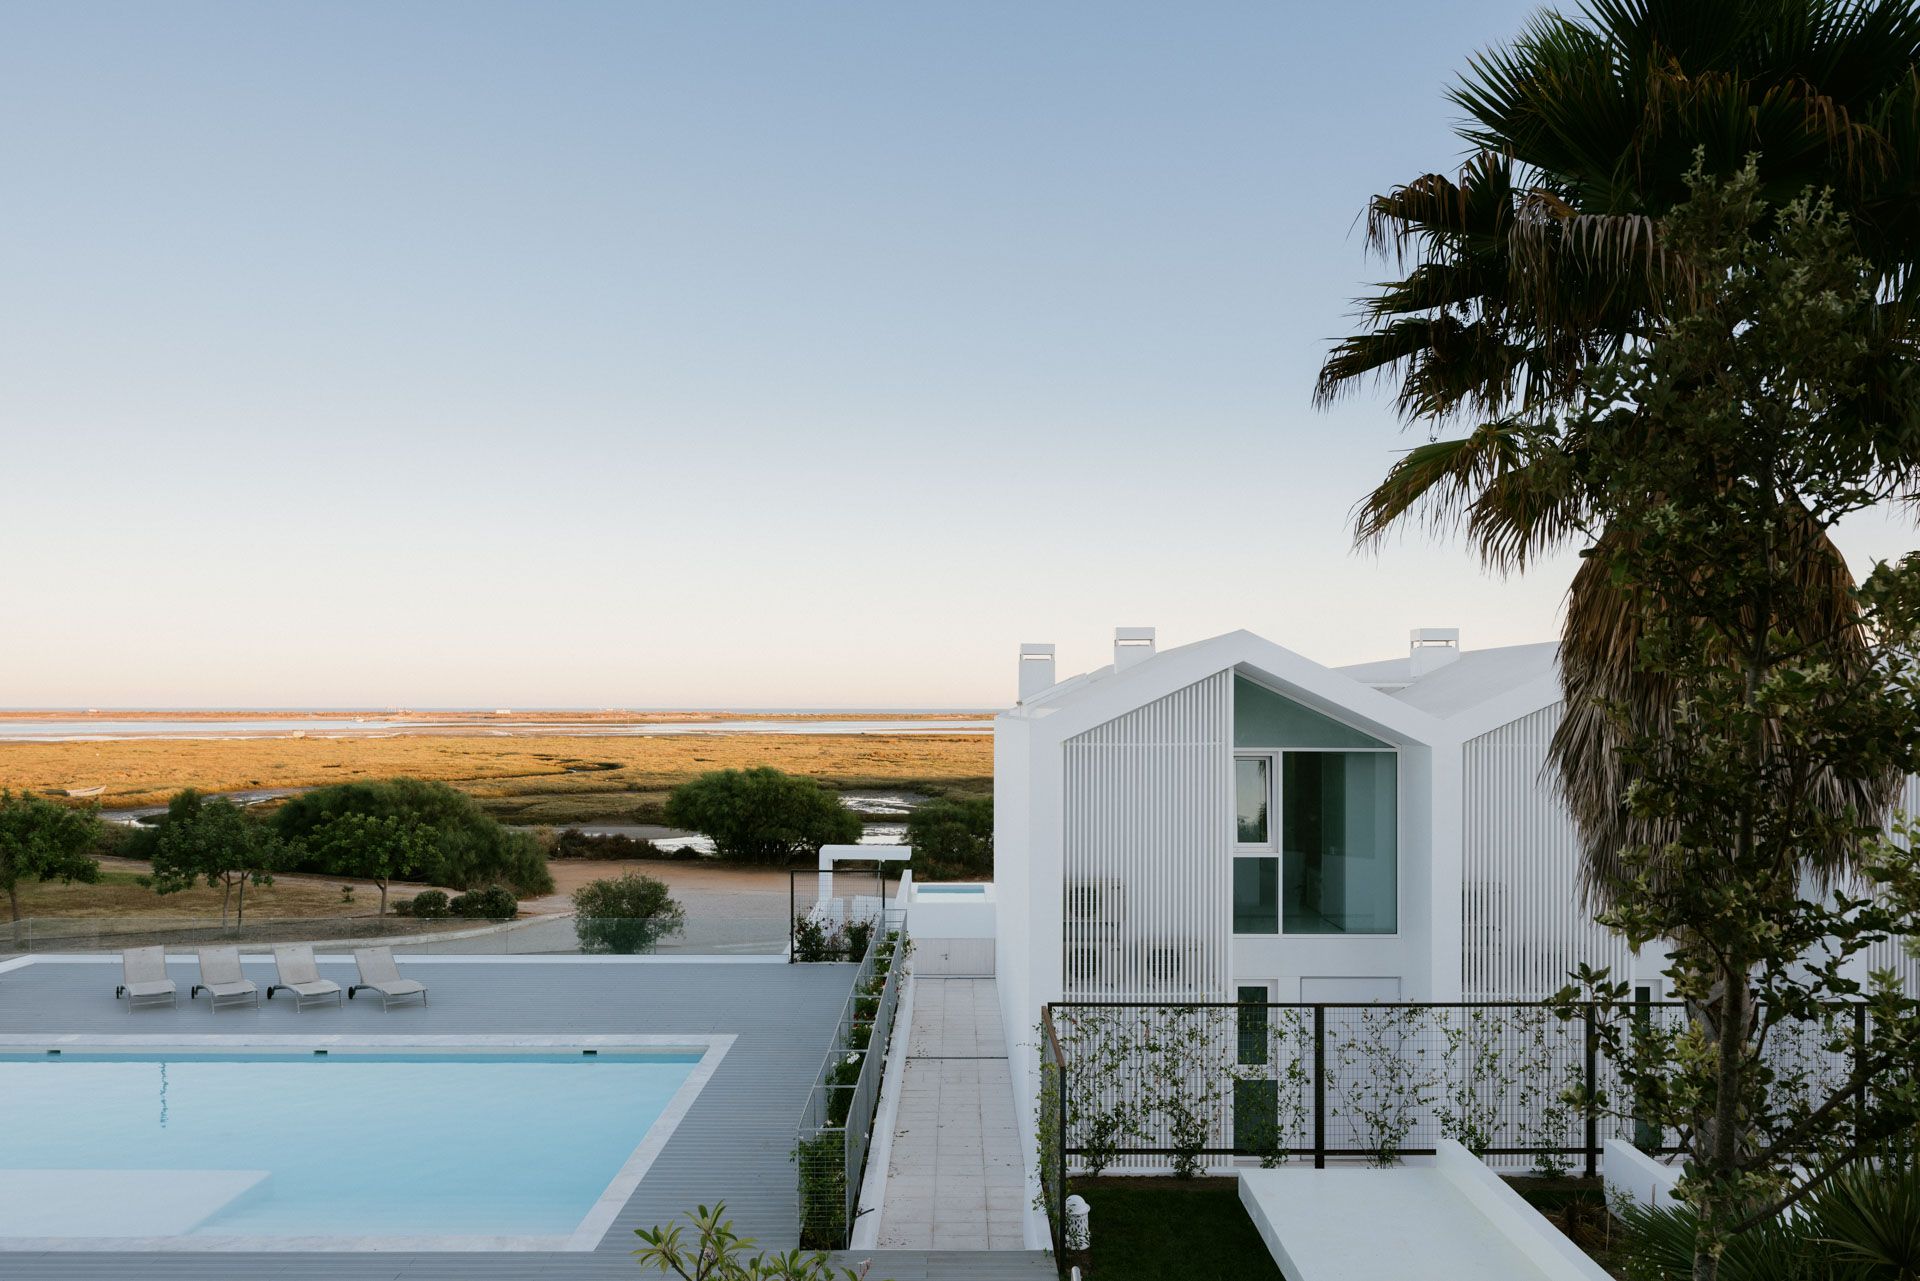 3 bed House For Sale in Tavira Municipality, Algarve